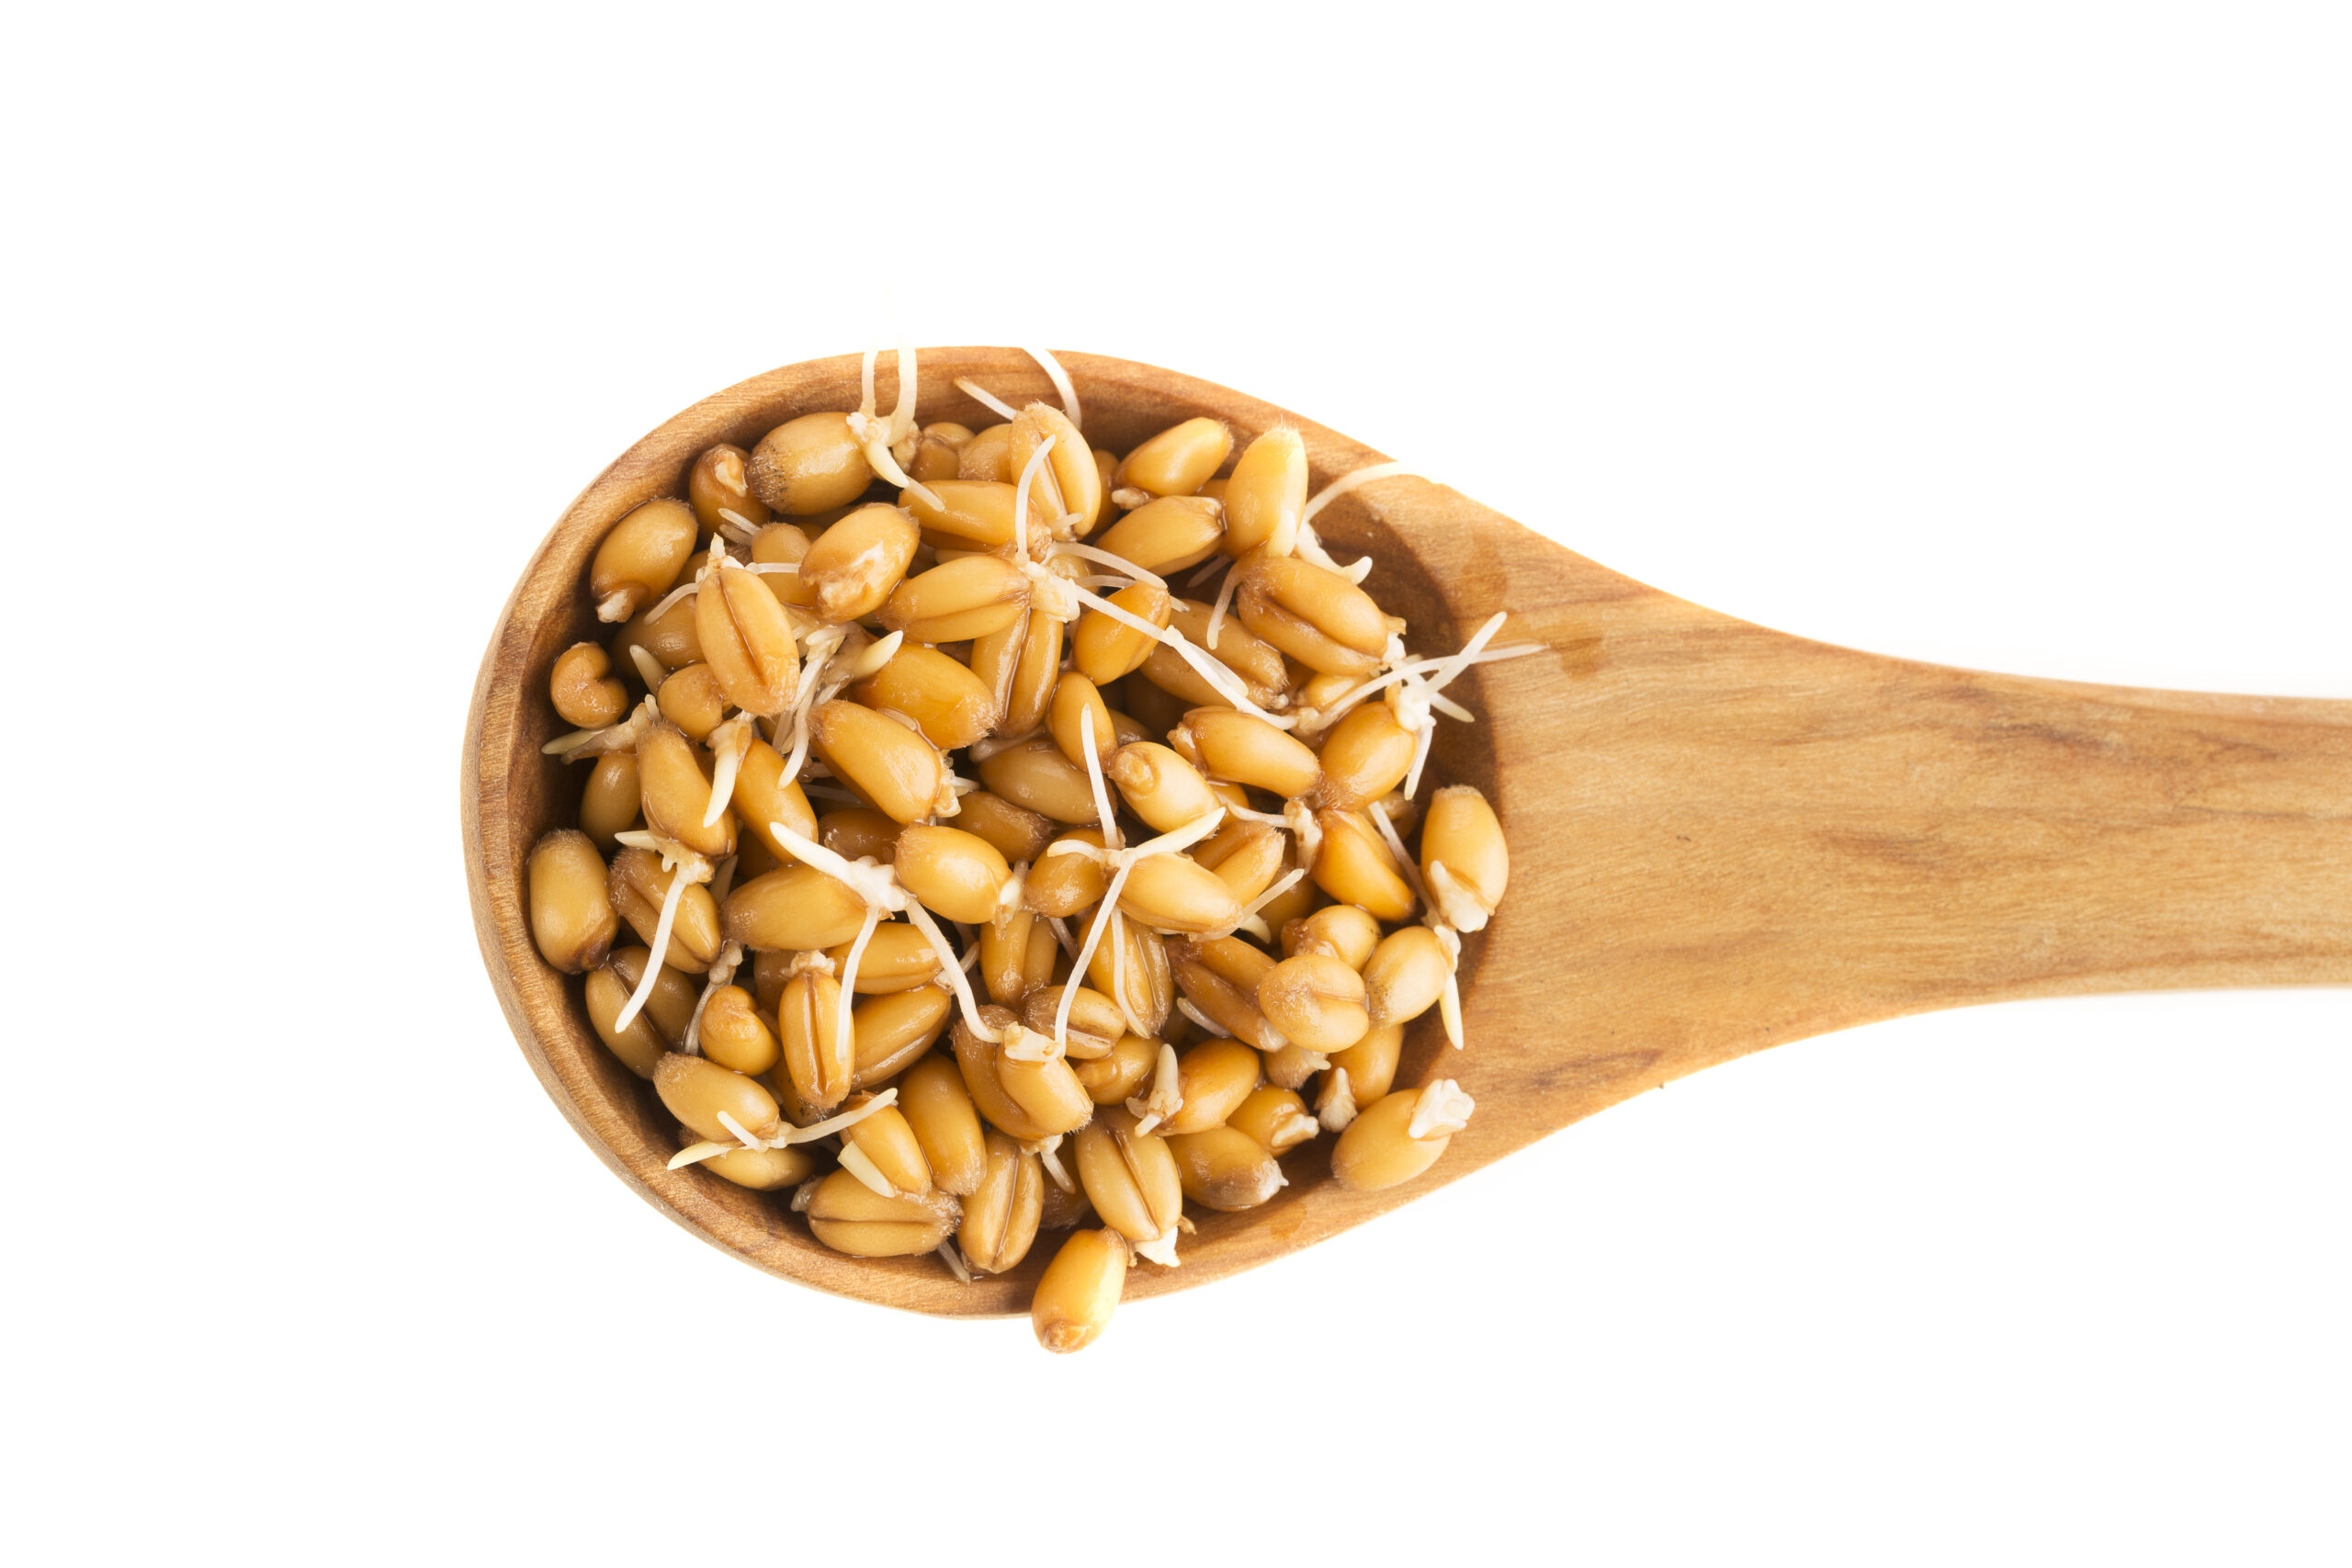 Sprouted grains beat processed flour on digestibility, nutrition